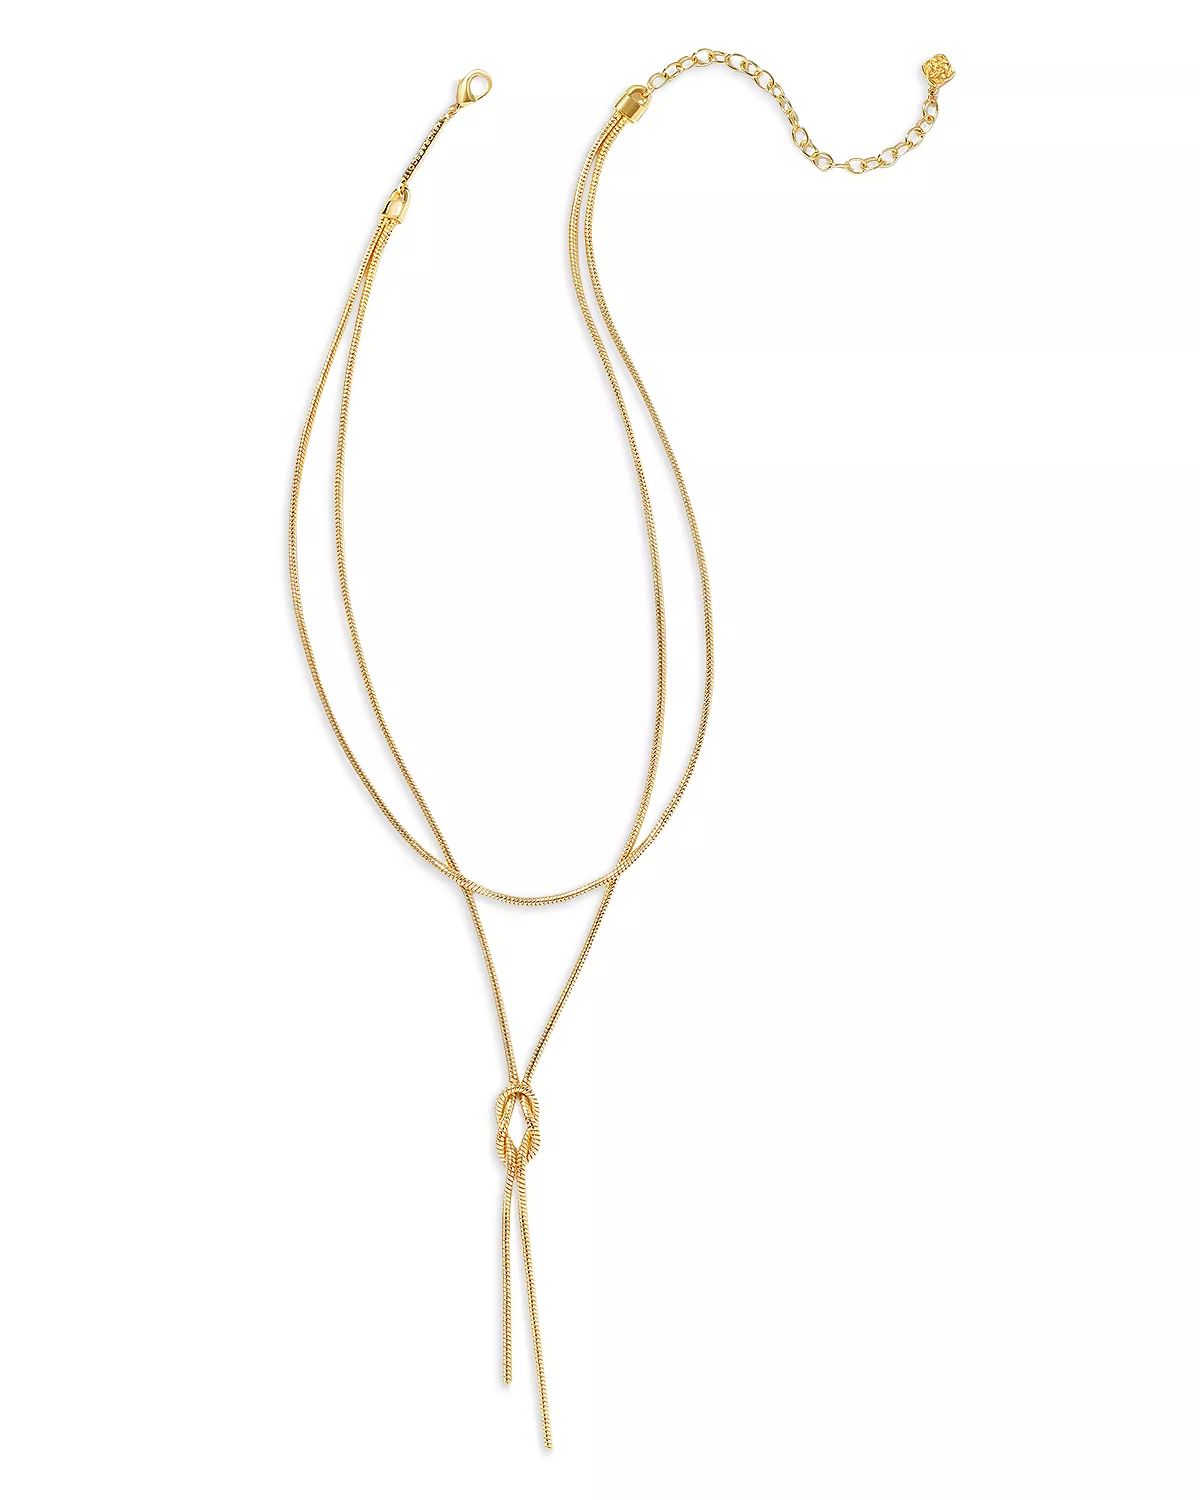 Annie Infinity Knotted Snake Chain Layered Lariat Necklace in 14K Gold Plated, 17" | Bloomingdale's (US)